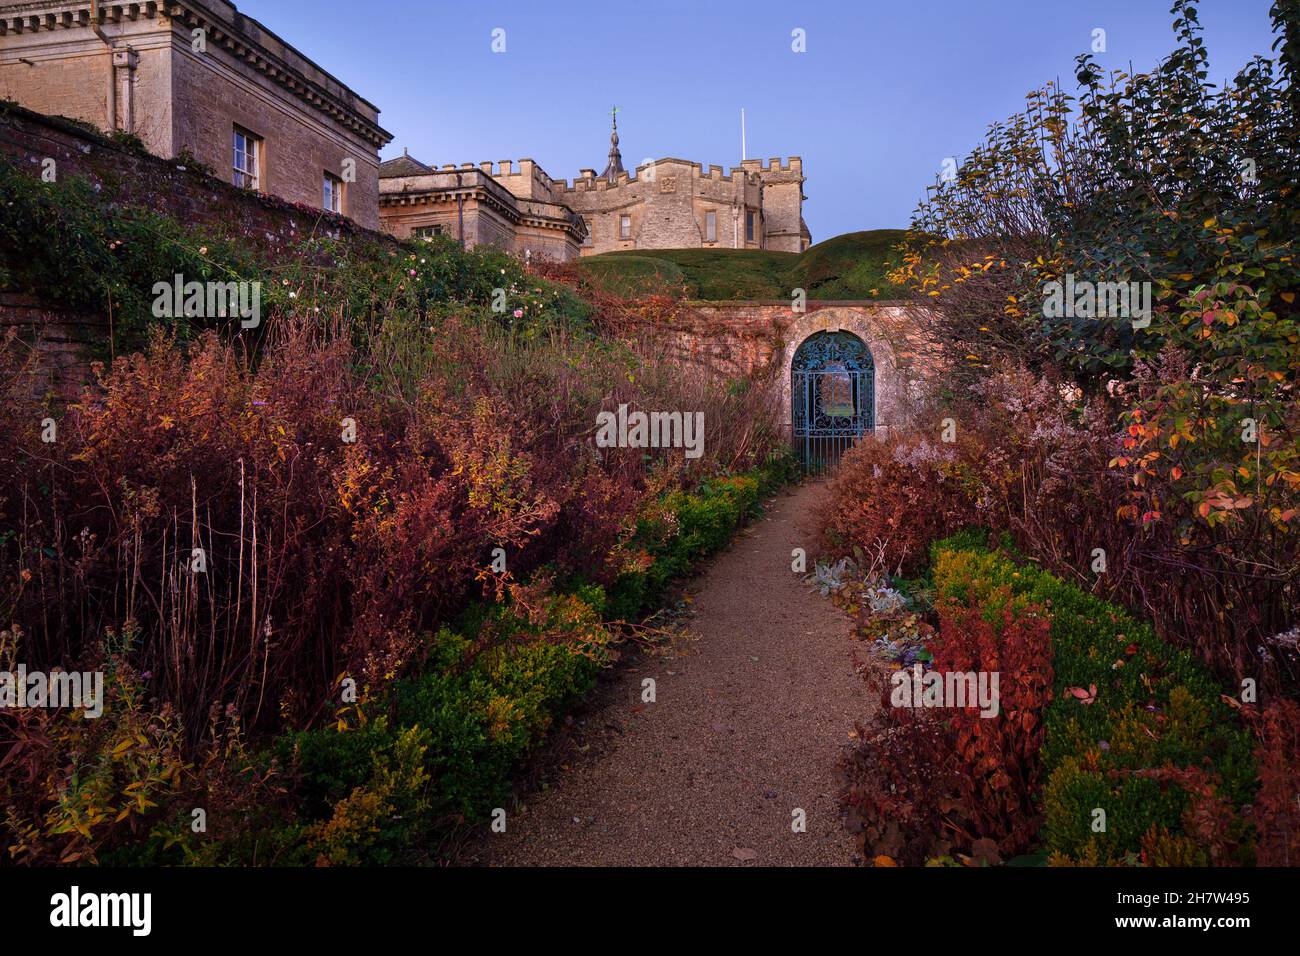 Gate entrance and formal gardens in early autumn light at Rousham House, Oxfordshire,England Stock Photo